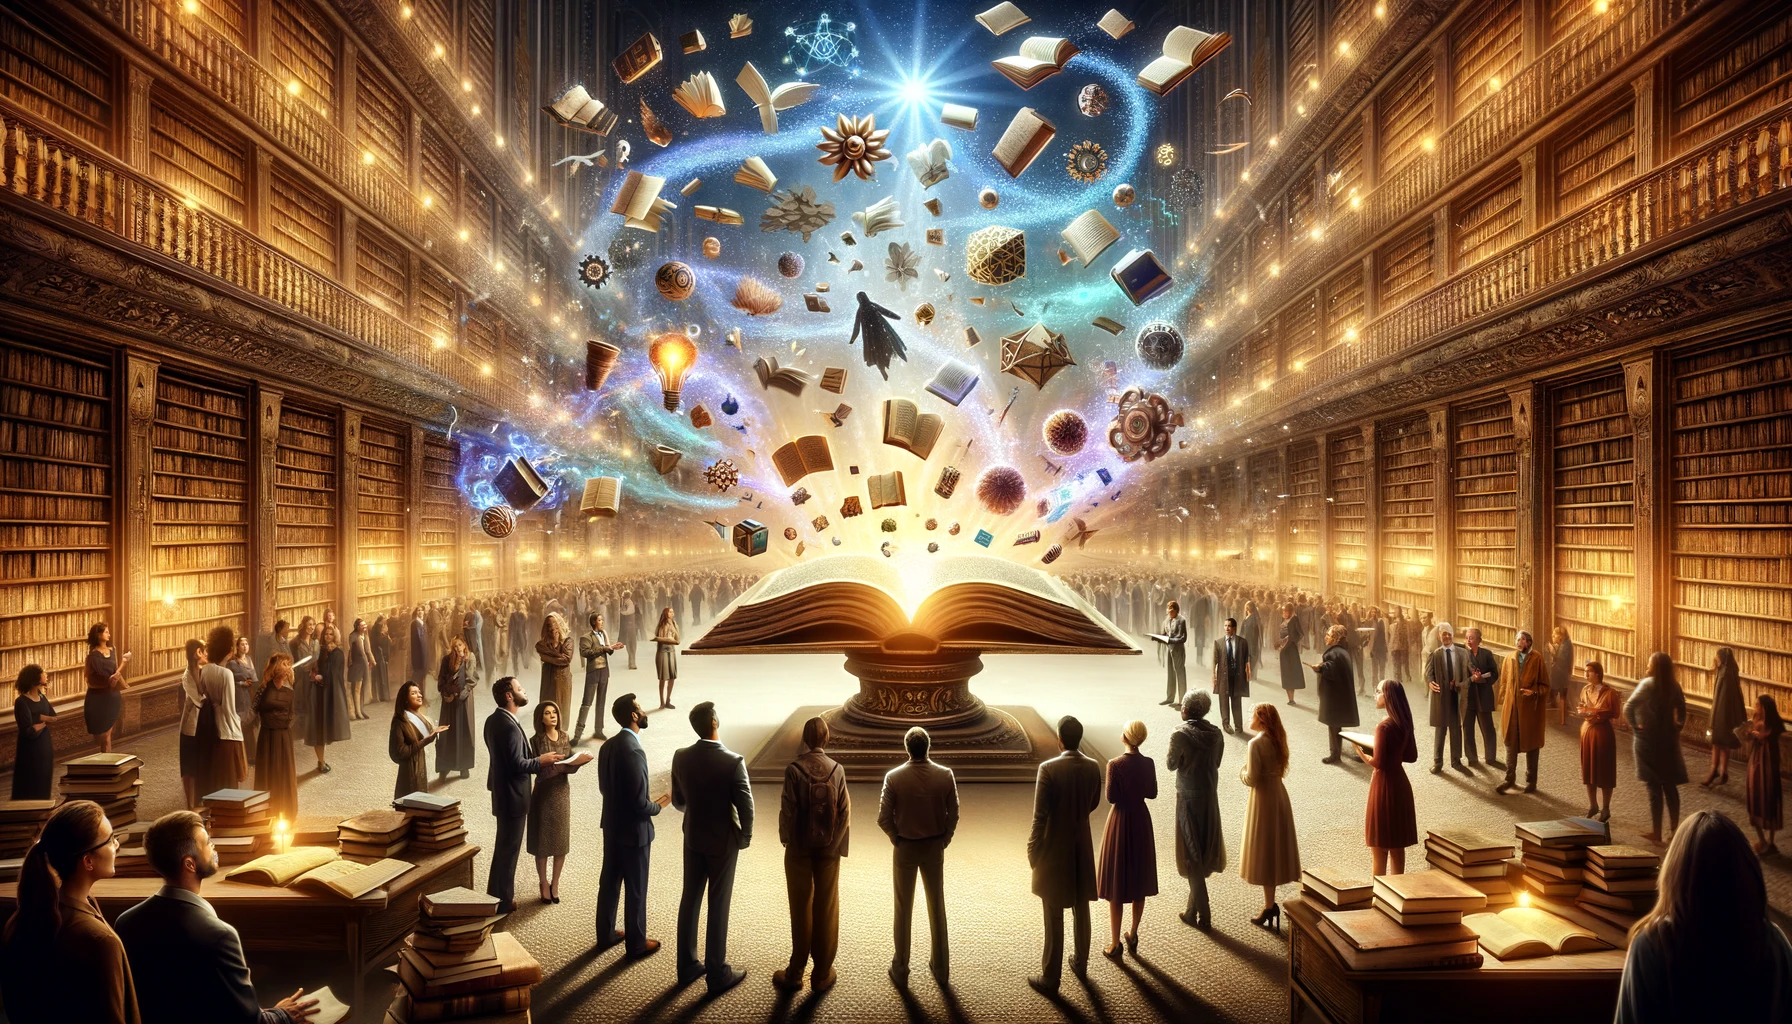 A diverse group of people engaging in a lively discussion in a library, surrounded by books and scrolls, with glowing words representing different theories floating above them, highlighting the transition from certainty to exploration.